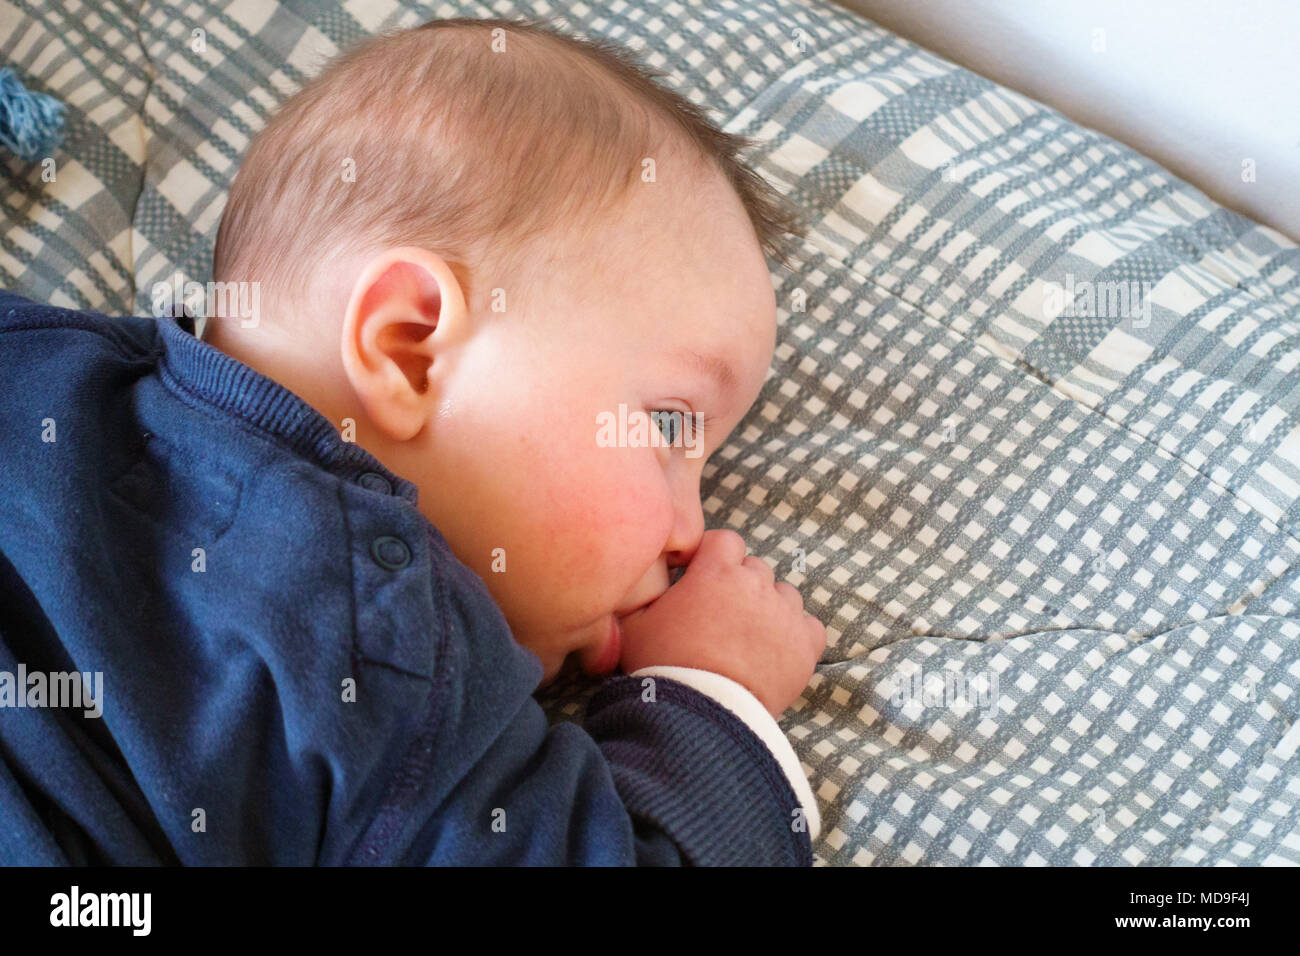 Top view of baby boy thumb sucking in bed, Greece Stock Photo